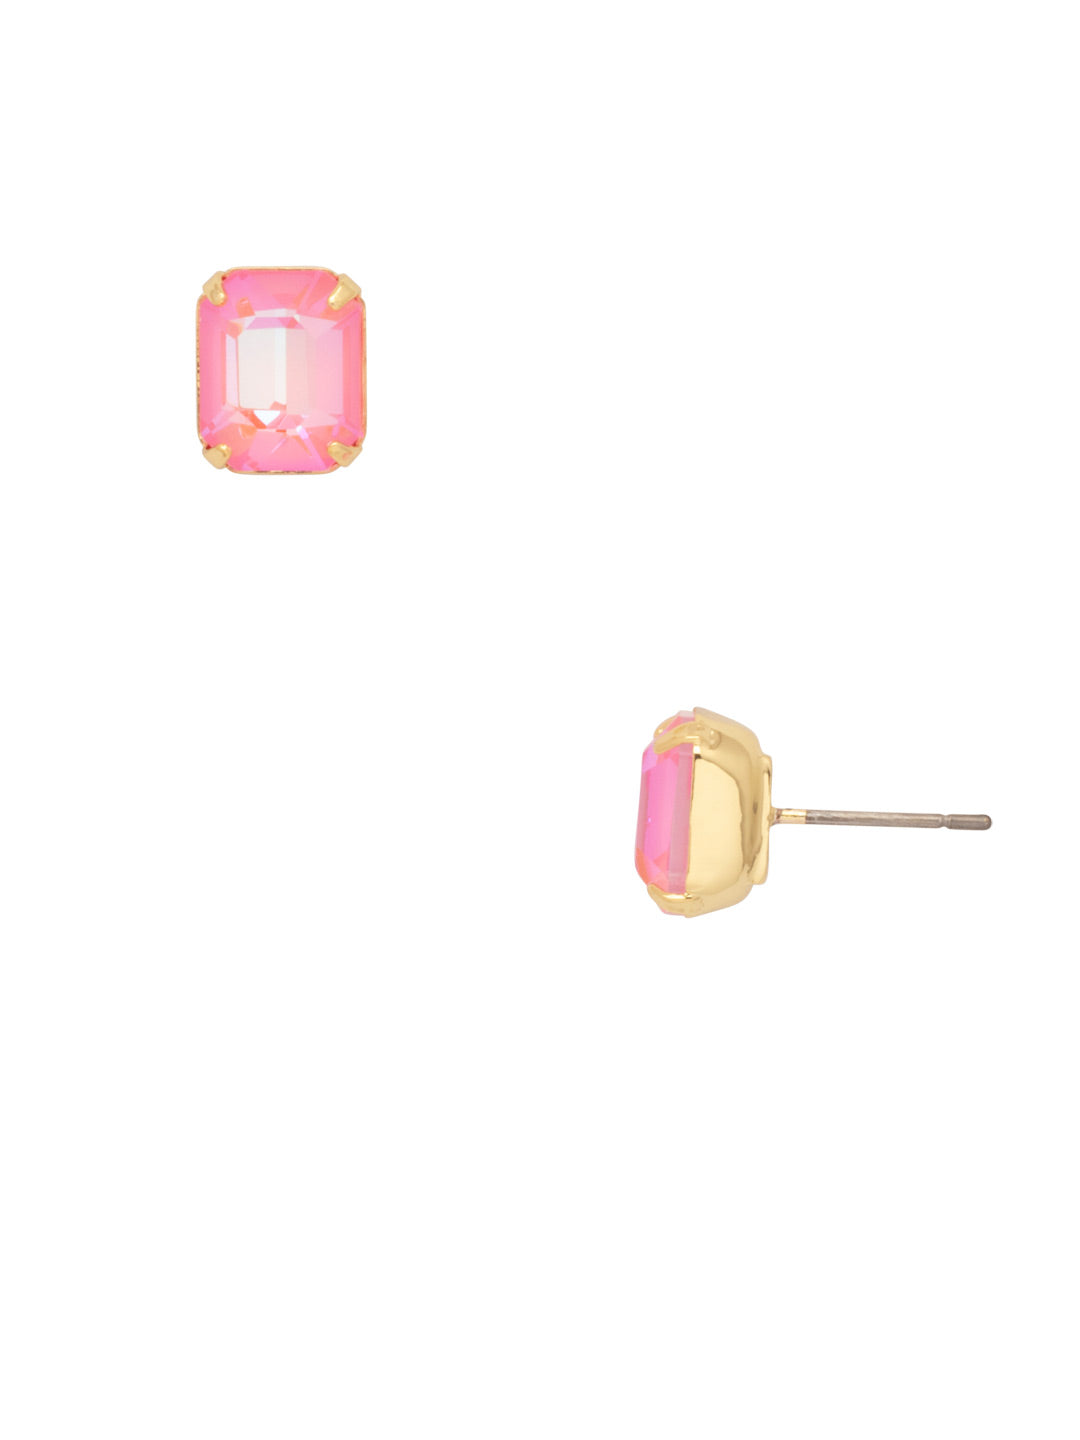 Octavia Stud Earrings - EDU53BGBFL - <p>These rounded emerald cut stud earrings can be worn alone or paired with anything for just a bit of extra bling! From Sorrelli's Big Flirt collection in our Bright Gold-tone finish.</p>